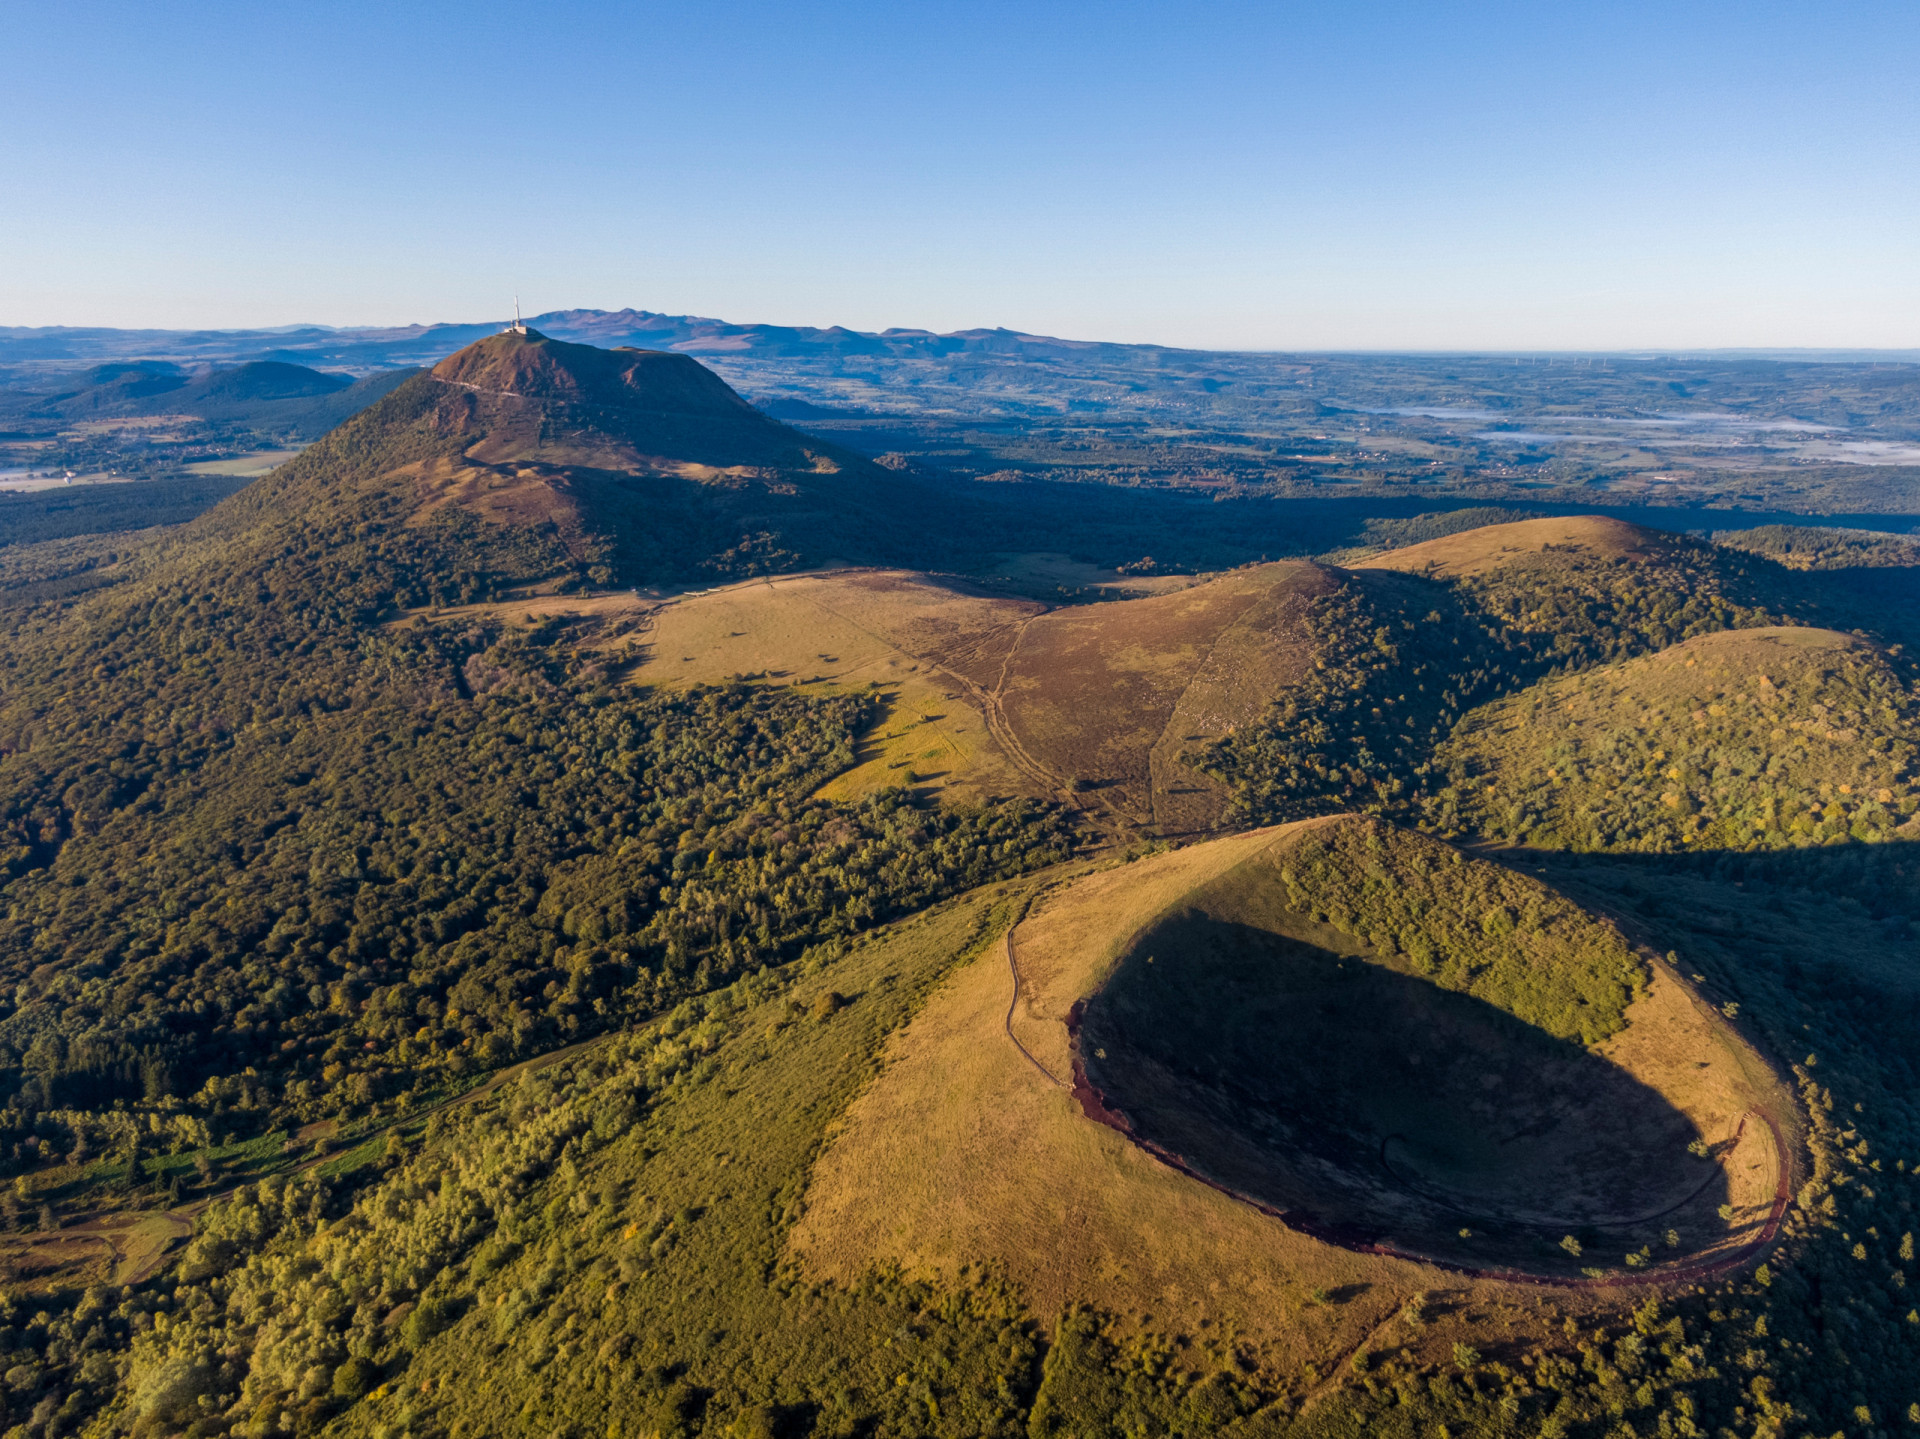 <p>One of the most iconic volcanic features of the Massif Central is Puy de Dôme. A trachytic lava dome, it is also one of the youngest volcanoes in the Puys chain, formed about 11,000 years ago.</p><p><a href="https://www.msn.com/en-us/community/channel/vid-7xx8mnucu55yw63we9va2gwr7uihbxwc68fxqp25x6tg4ftibpra?cvid=94631541bc0f4f89bfd59158d696ad7e">Follow us and access great exclusive content every day</a></p>